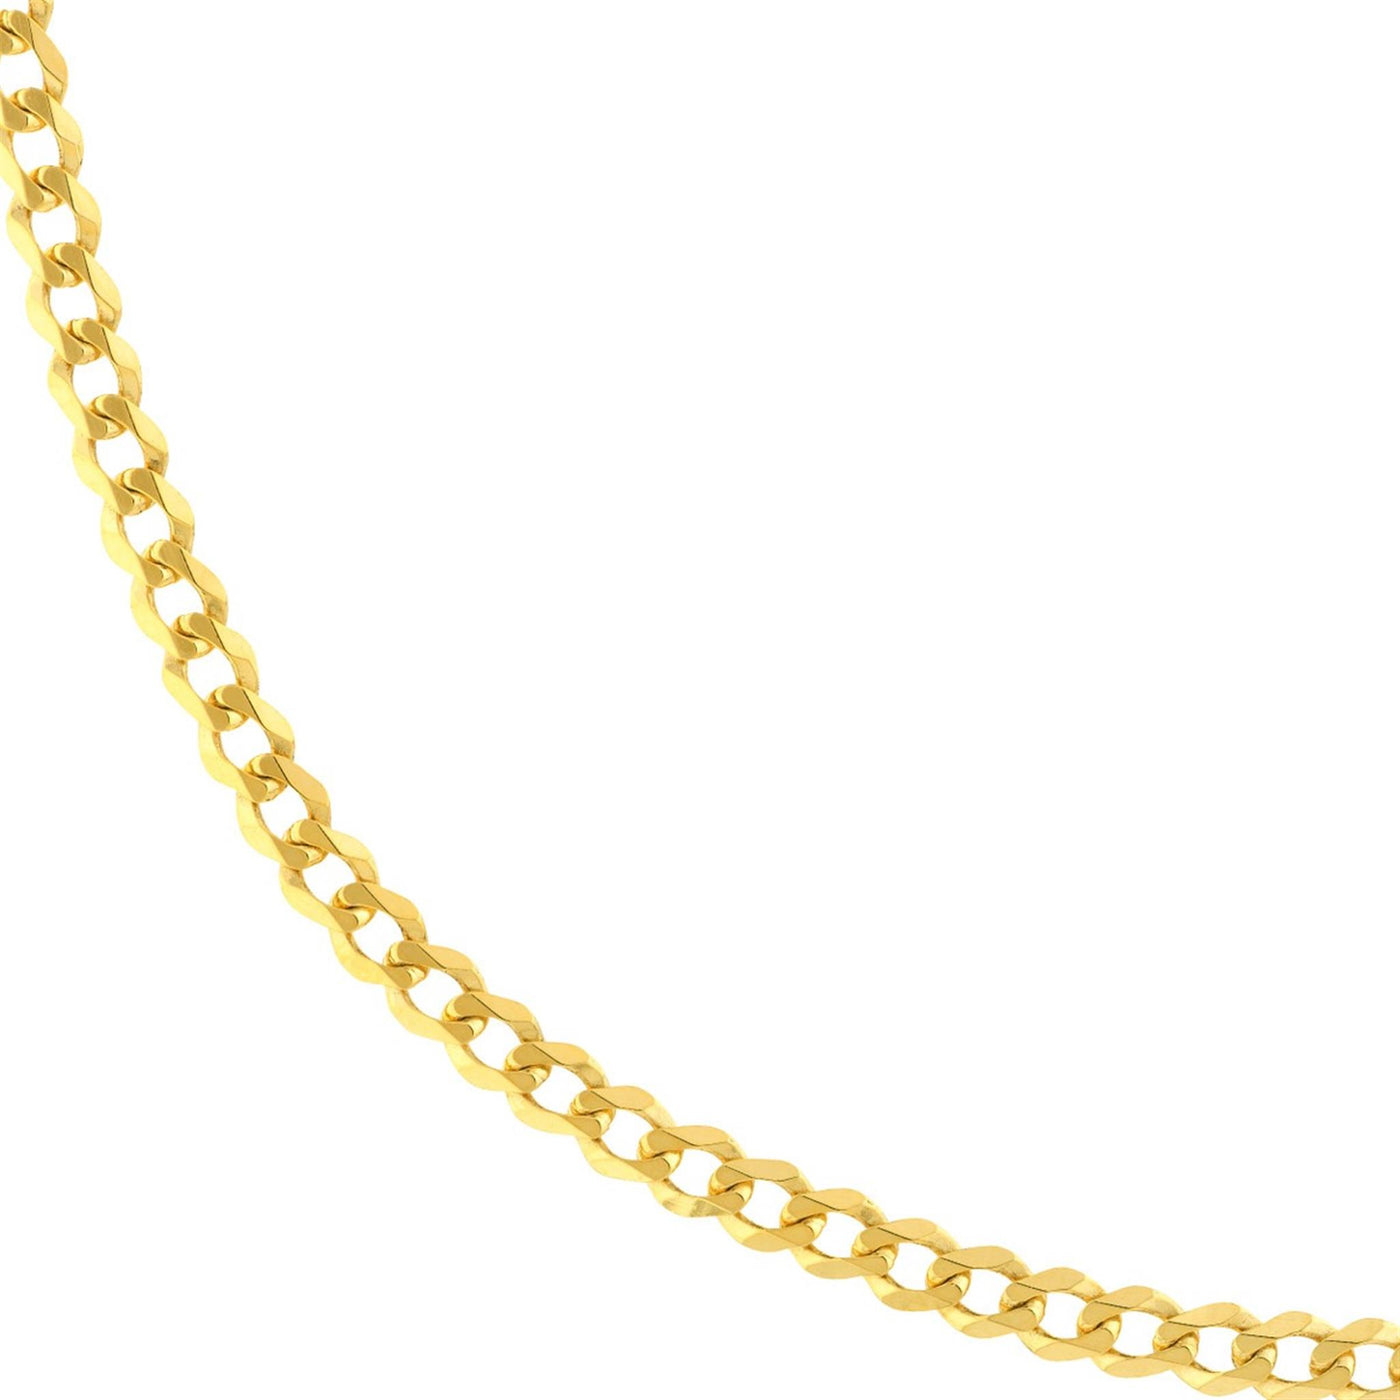 10K Yellow Gold 3.1mm 20" Curb Chain